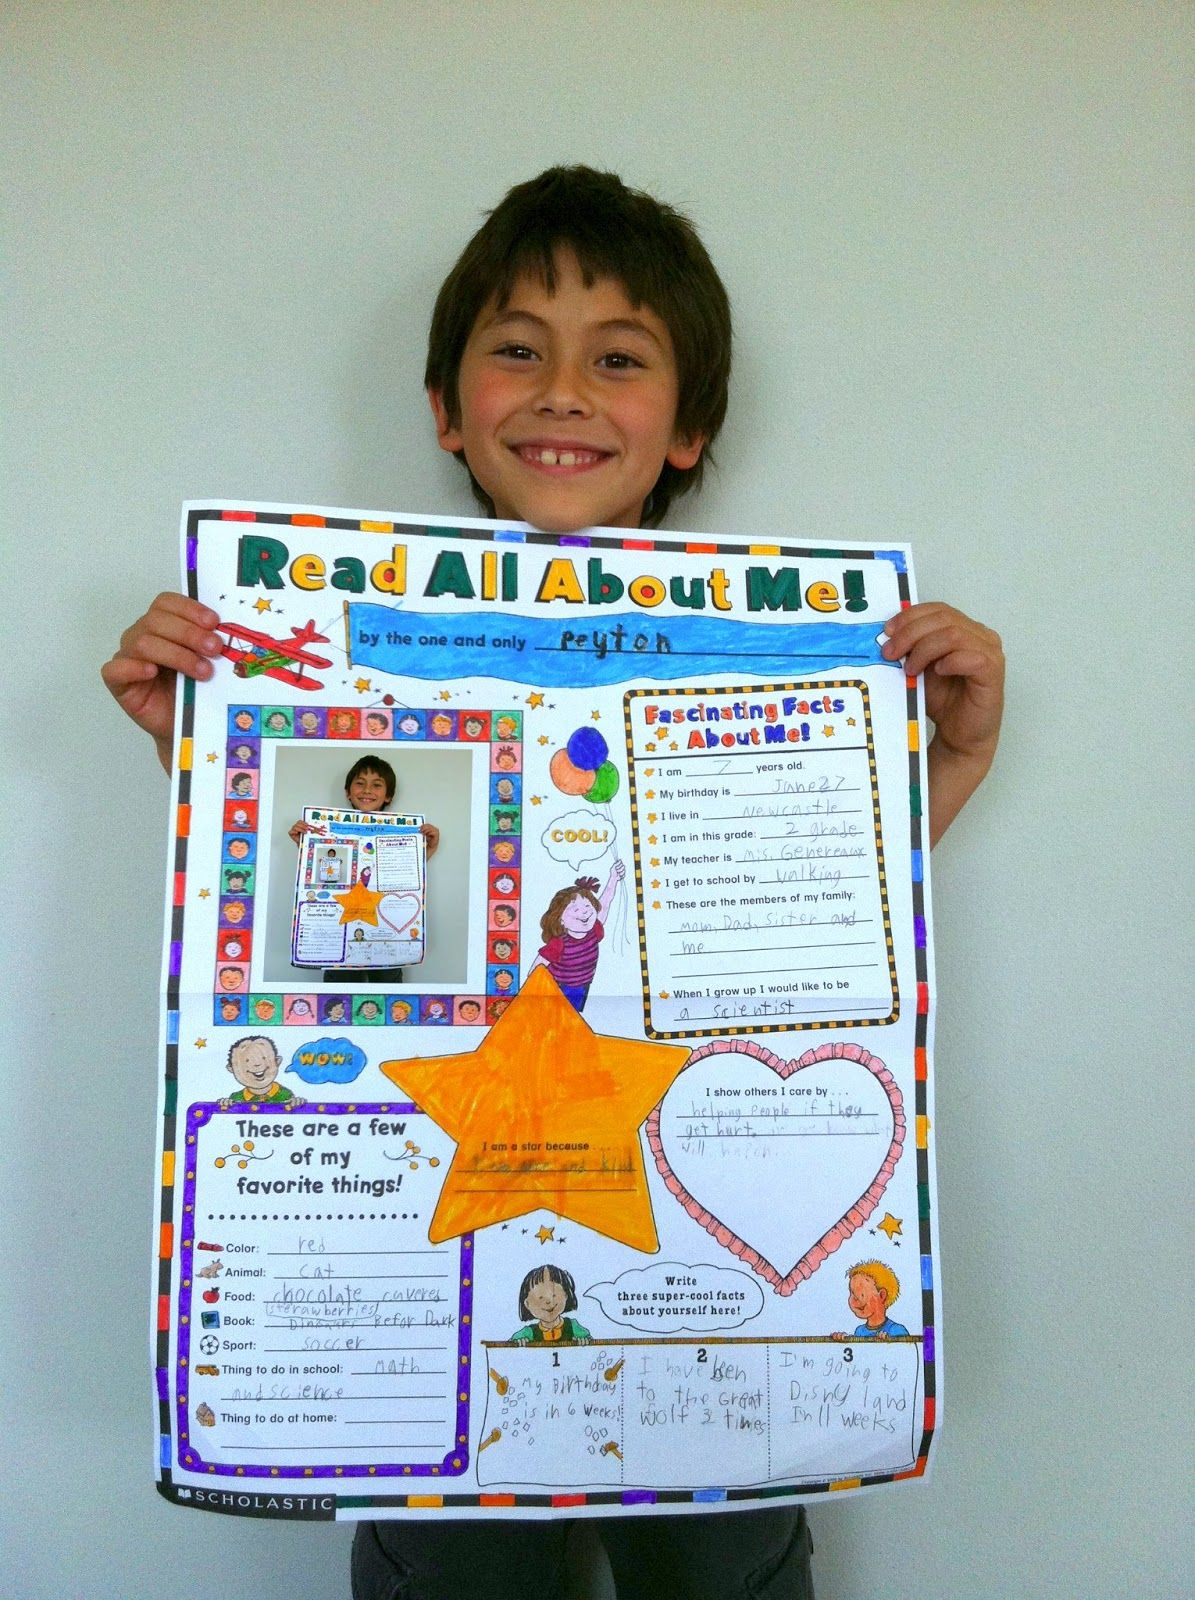 10 Cute School Project Ideas For Kids the contemplative creative school project about me poster 2024